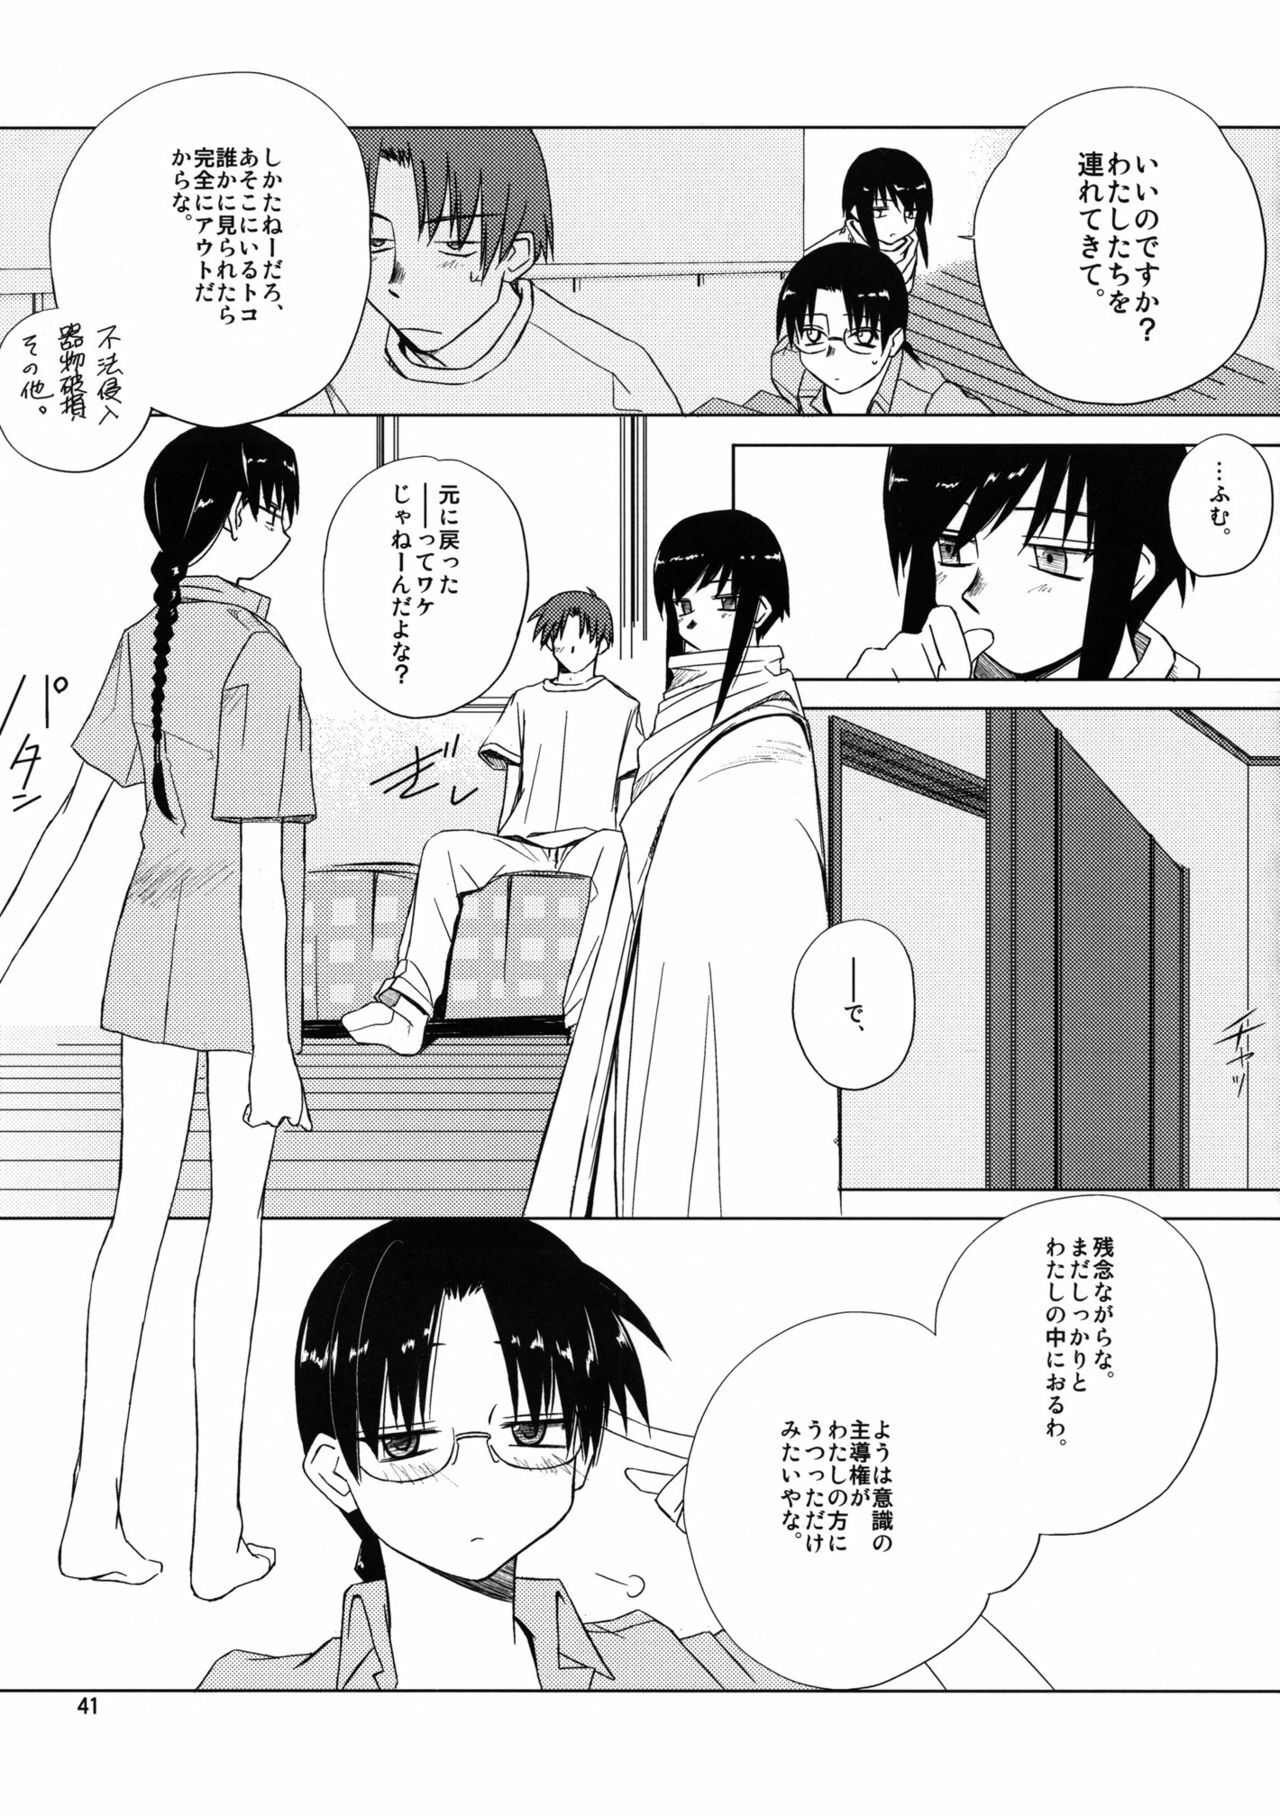 (C68) [Tear Drop (tsuina)] [C2] (To Heart) page 42 full